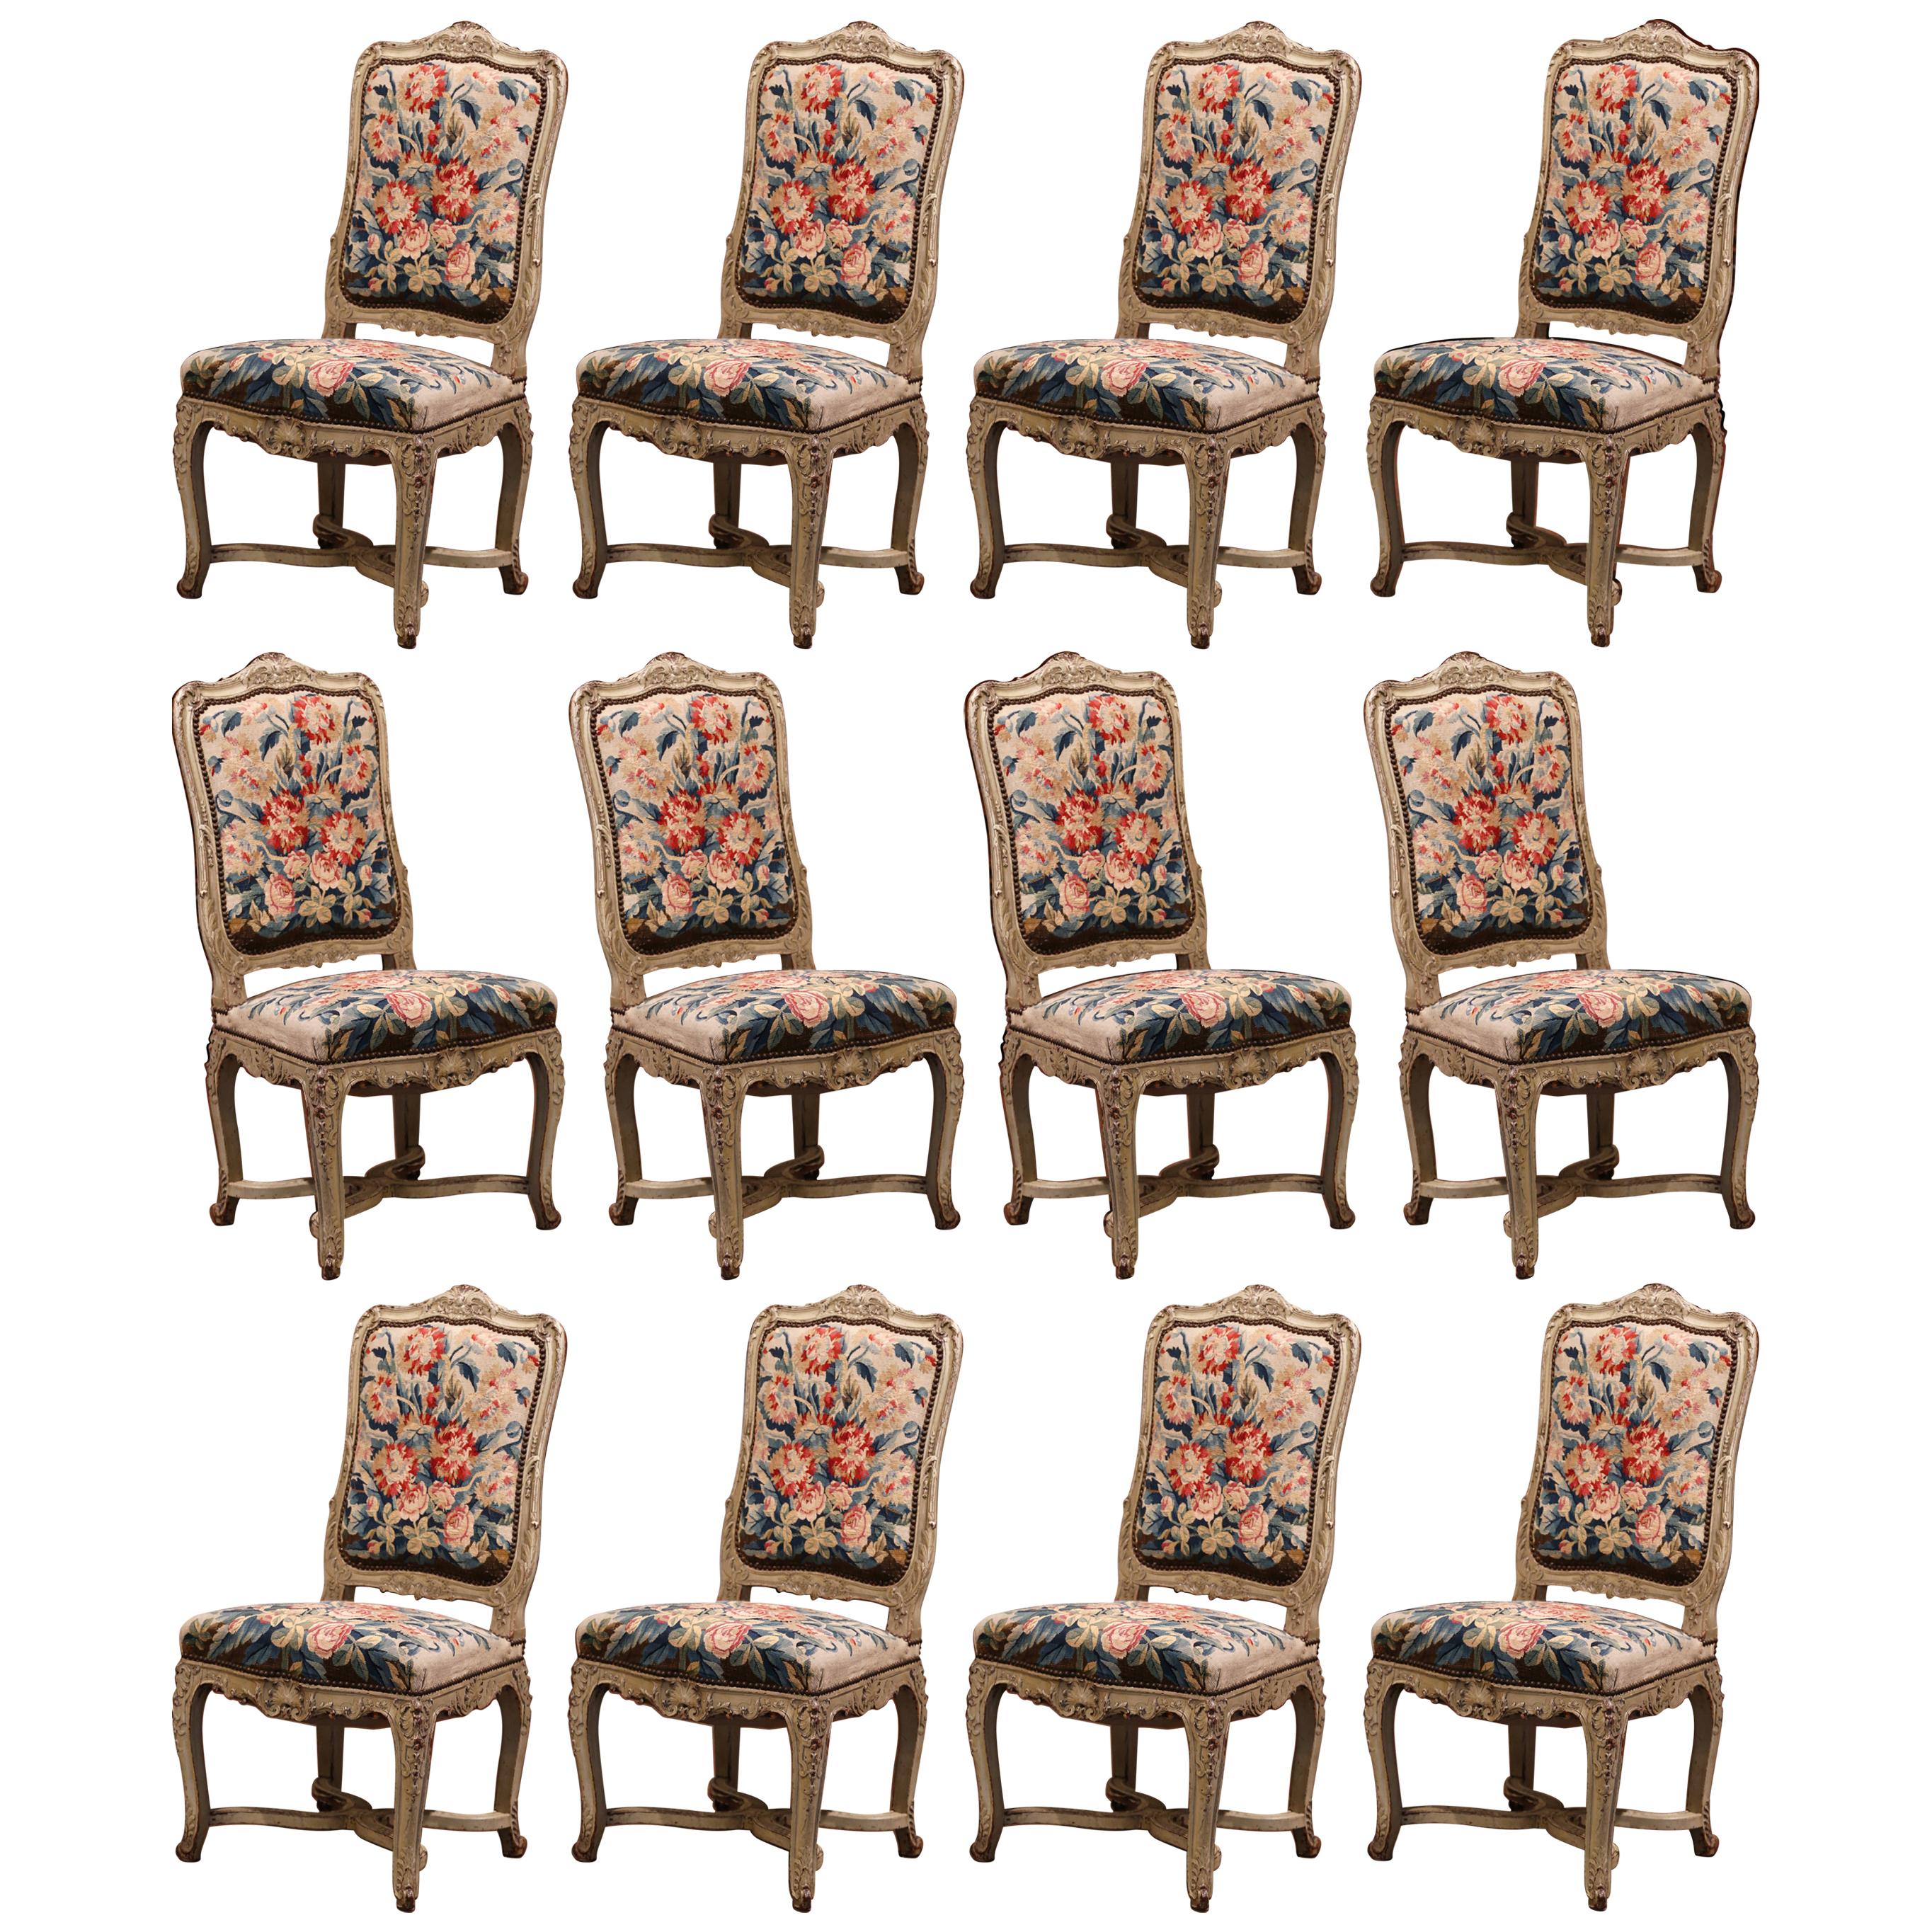 19th Century Carved Painted Dining Room Chairs with Aubusson Tapestry Set of 12